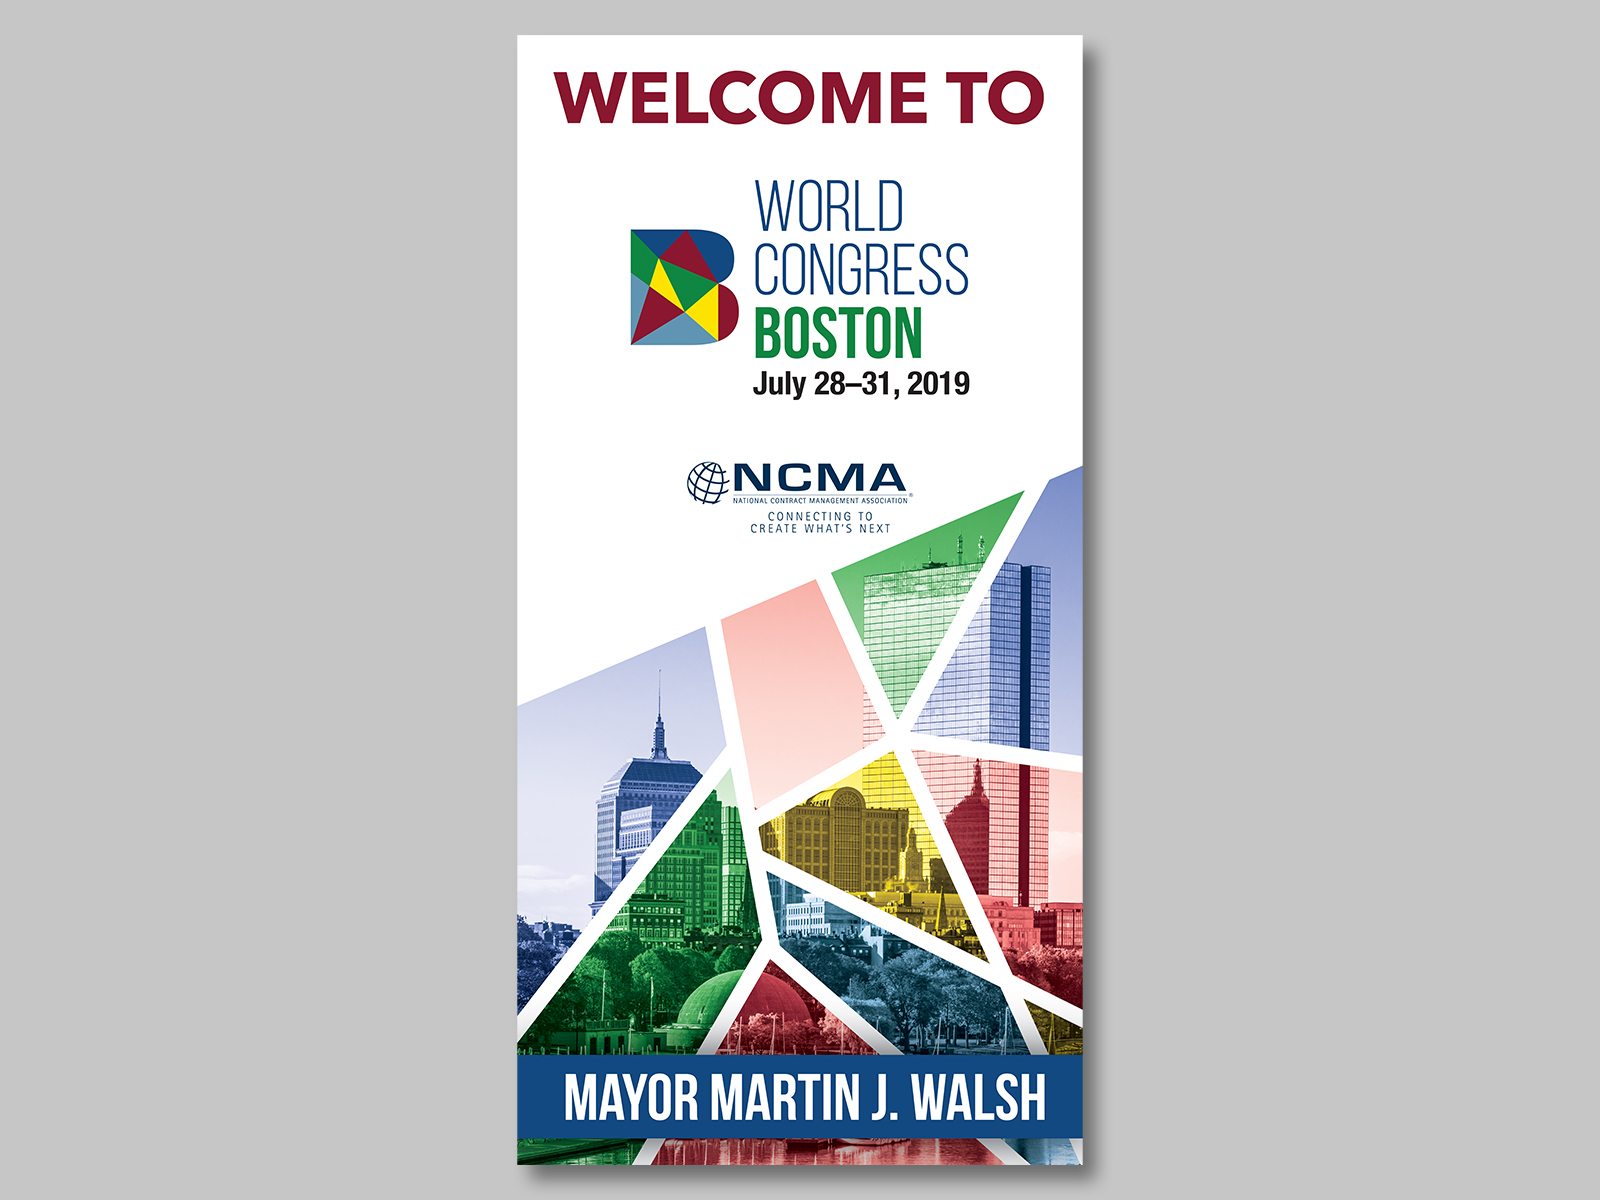 Welcome Banner for World Congress 2019 in Boston, MA by Meghan Aloshen